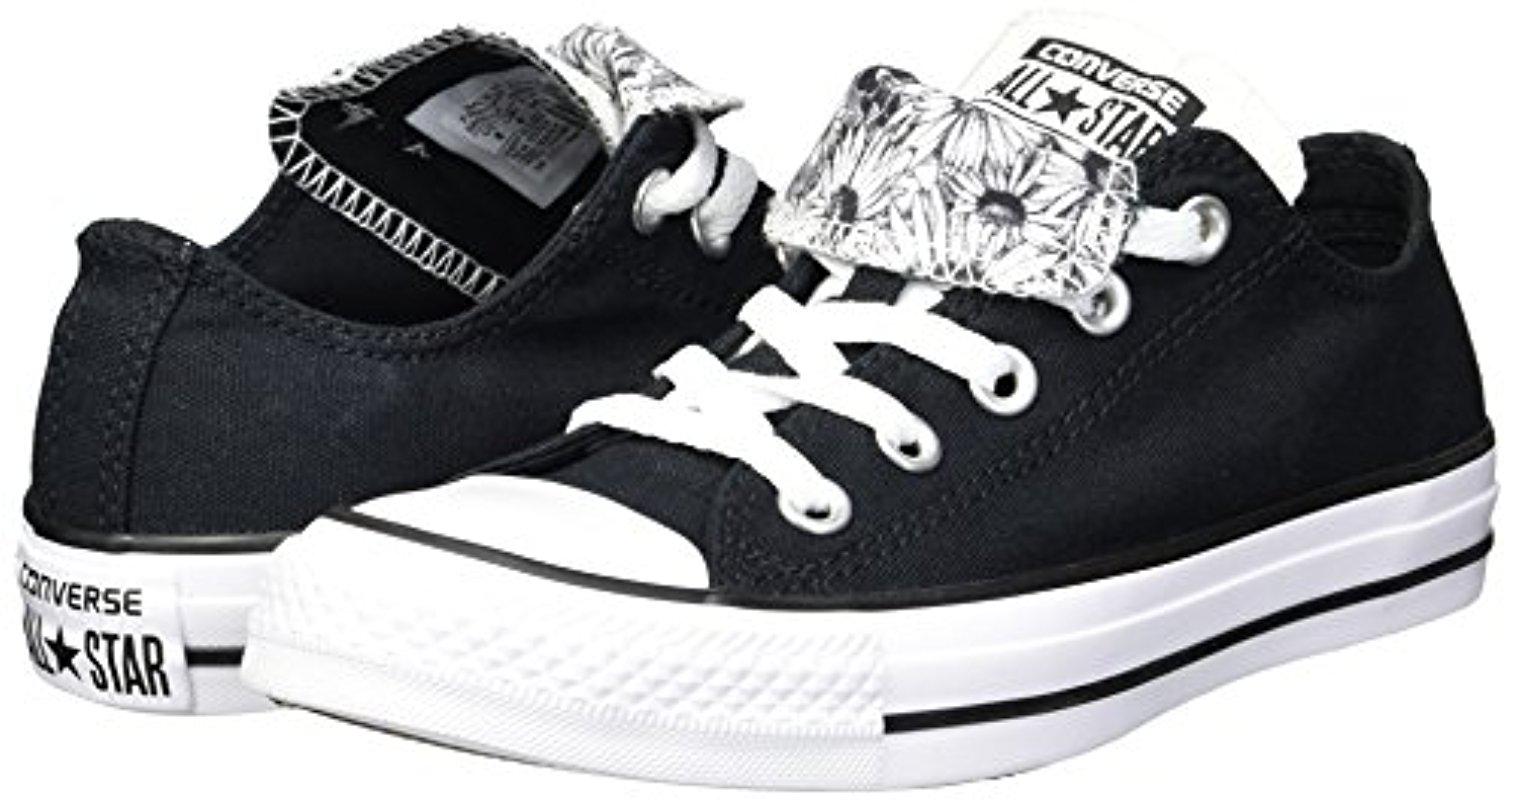 Converse Rubber Double Tongue Floral Low Top Sneaker in Black/White/Black  (Black) | Lyst